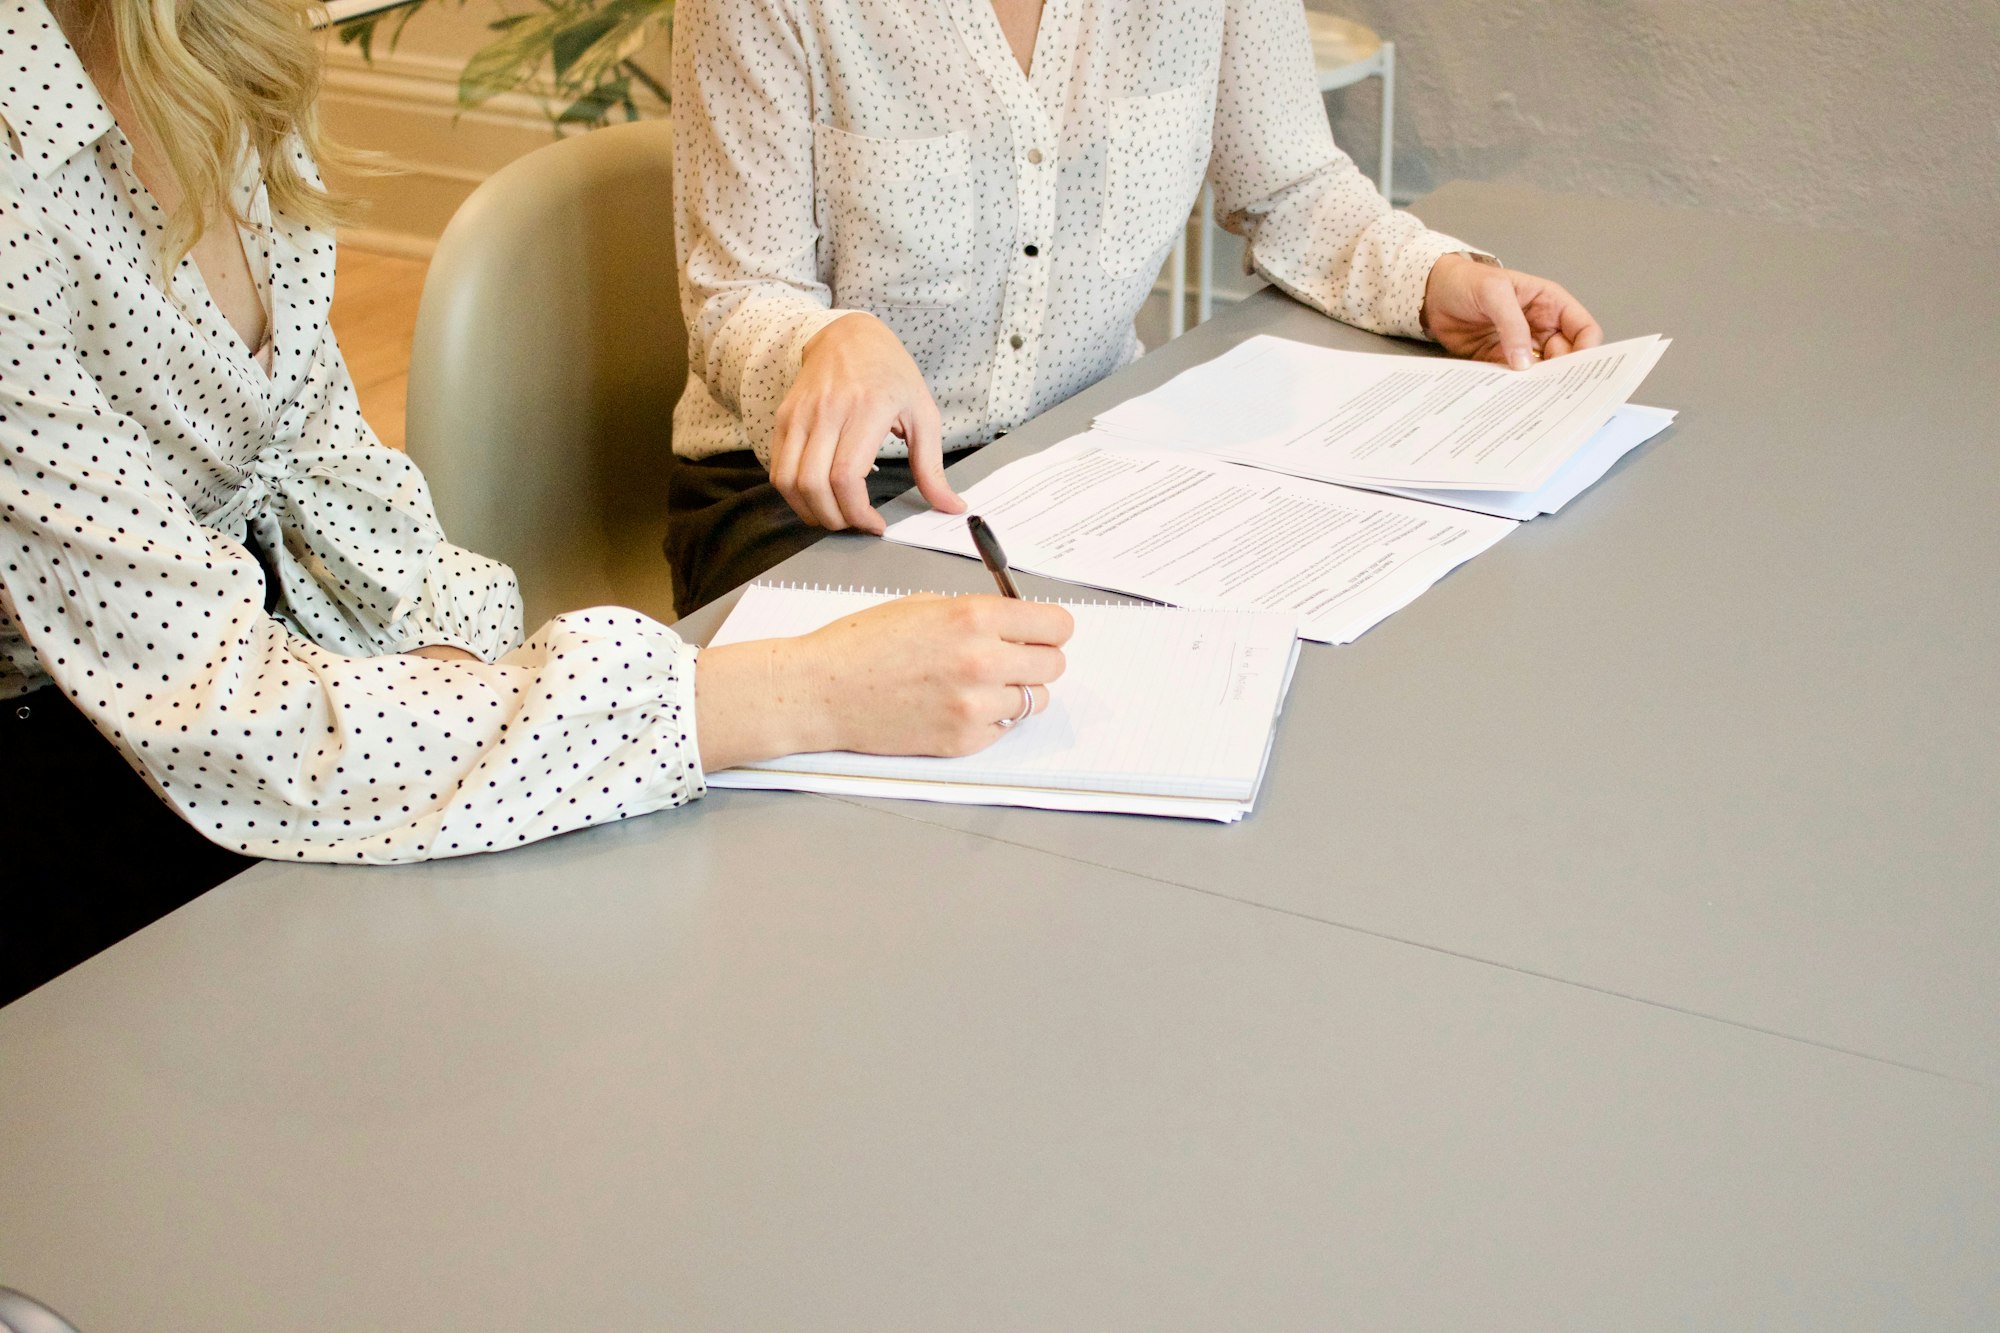 two people going over and signing a document